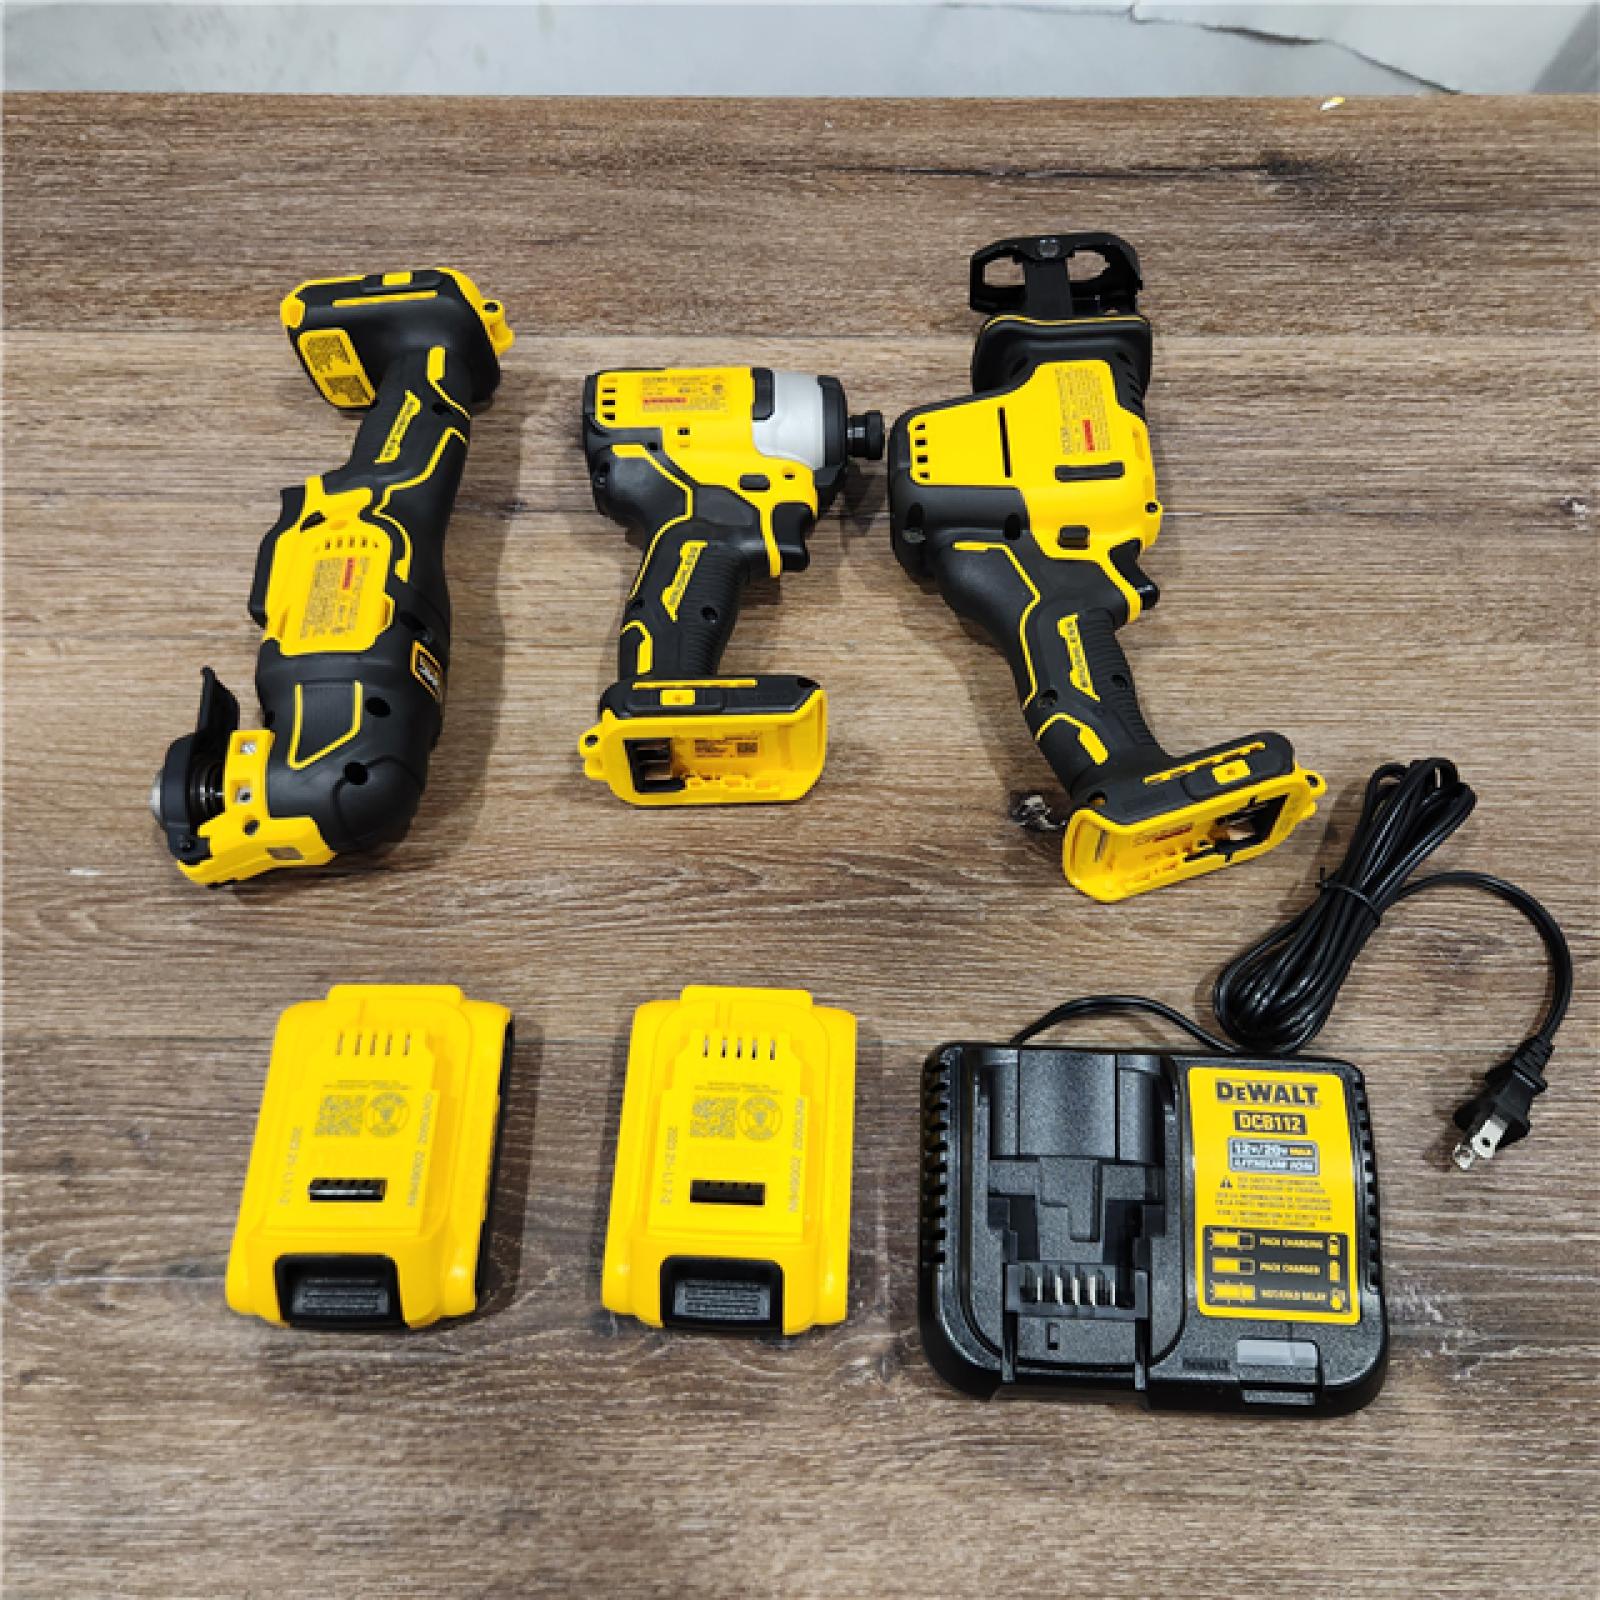 AS- IS DEWALT ATOMIC 20-Volt Lithium-Ion Cordless Brushless Combo Kit (4-Tool)  Charger and Bag battery  included